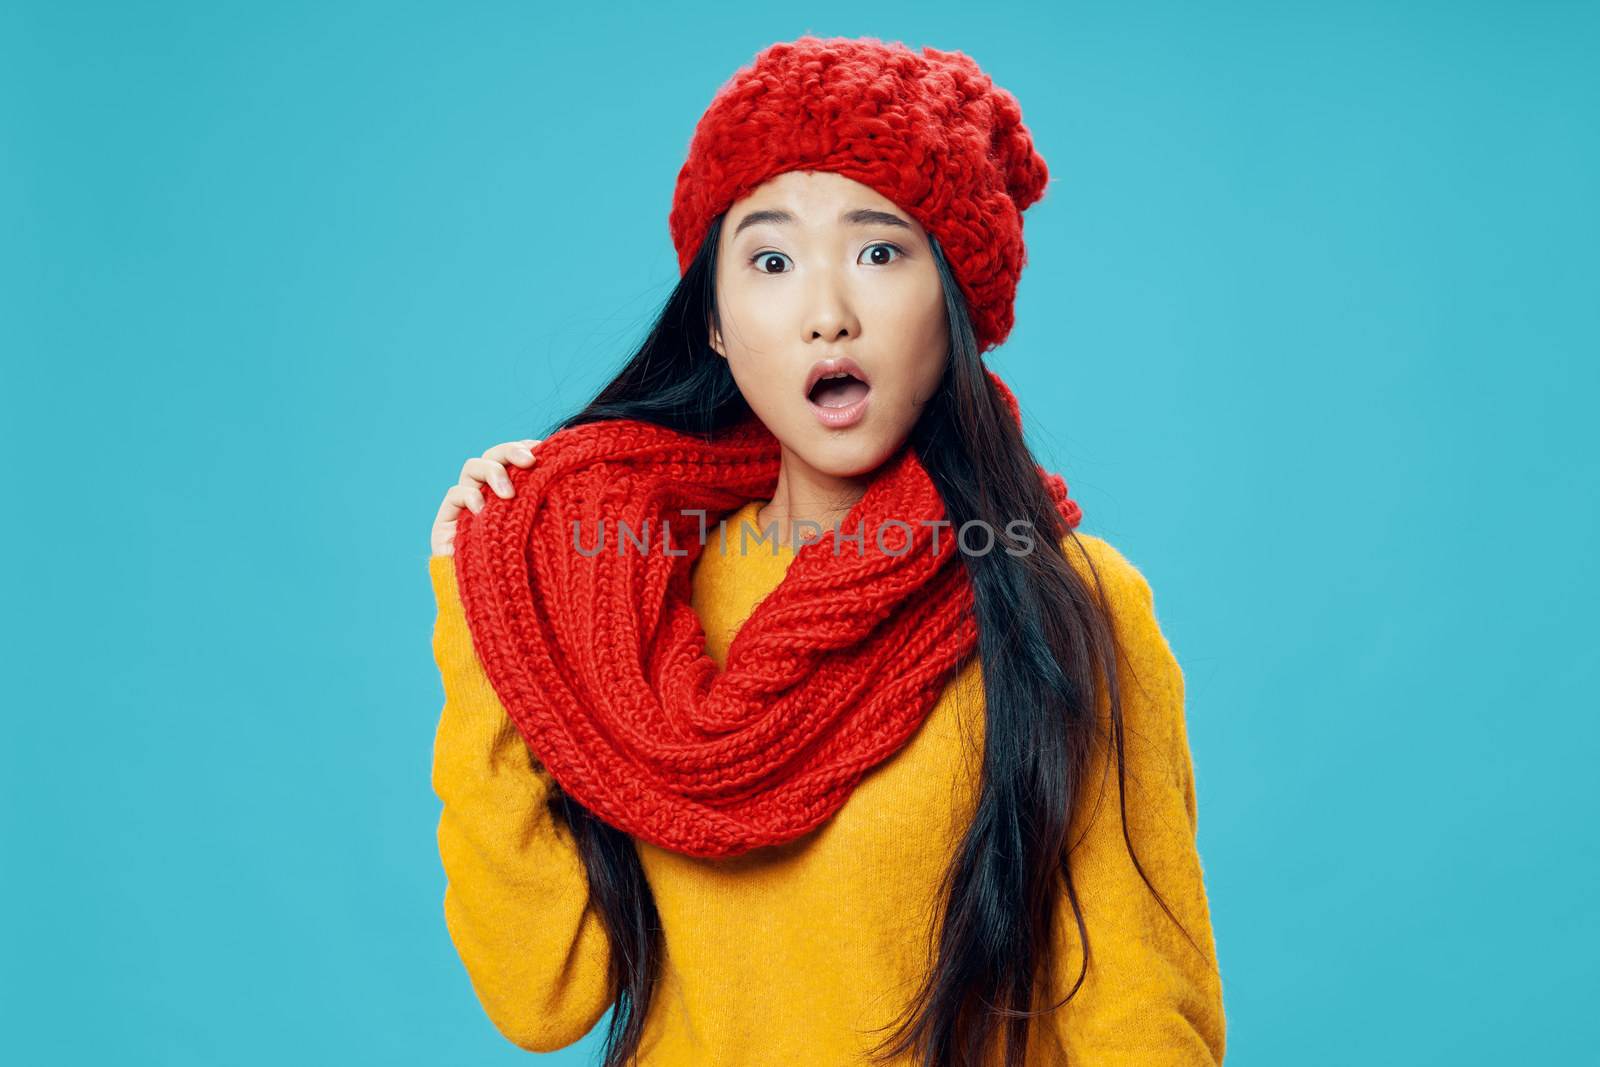 Surprised woman in knitted hat and scarf with open mouth by SHOTPRIME